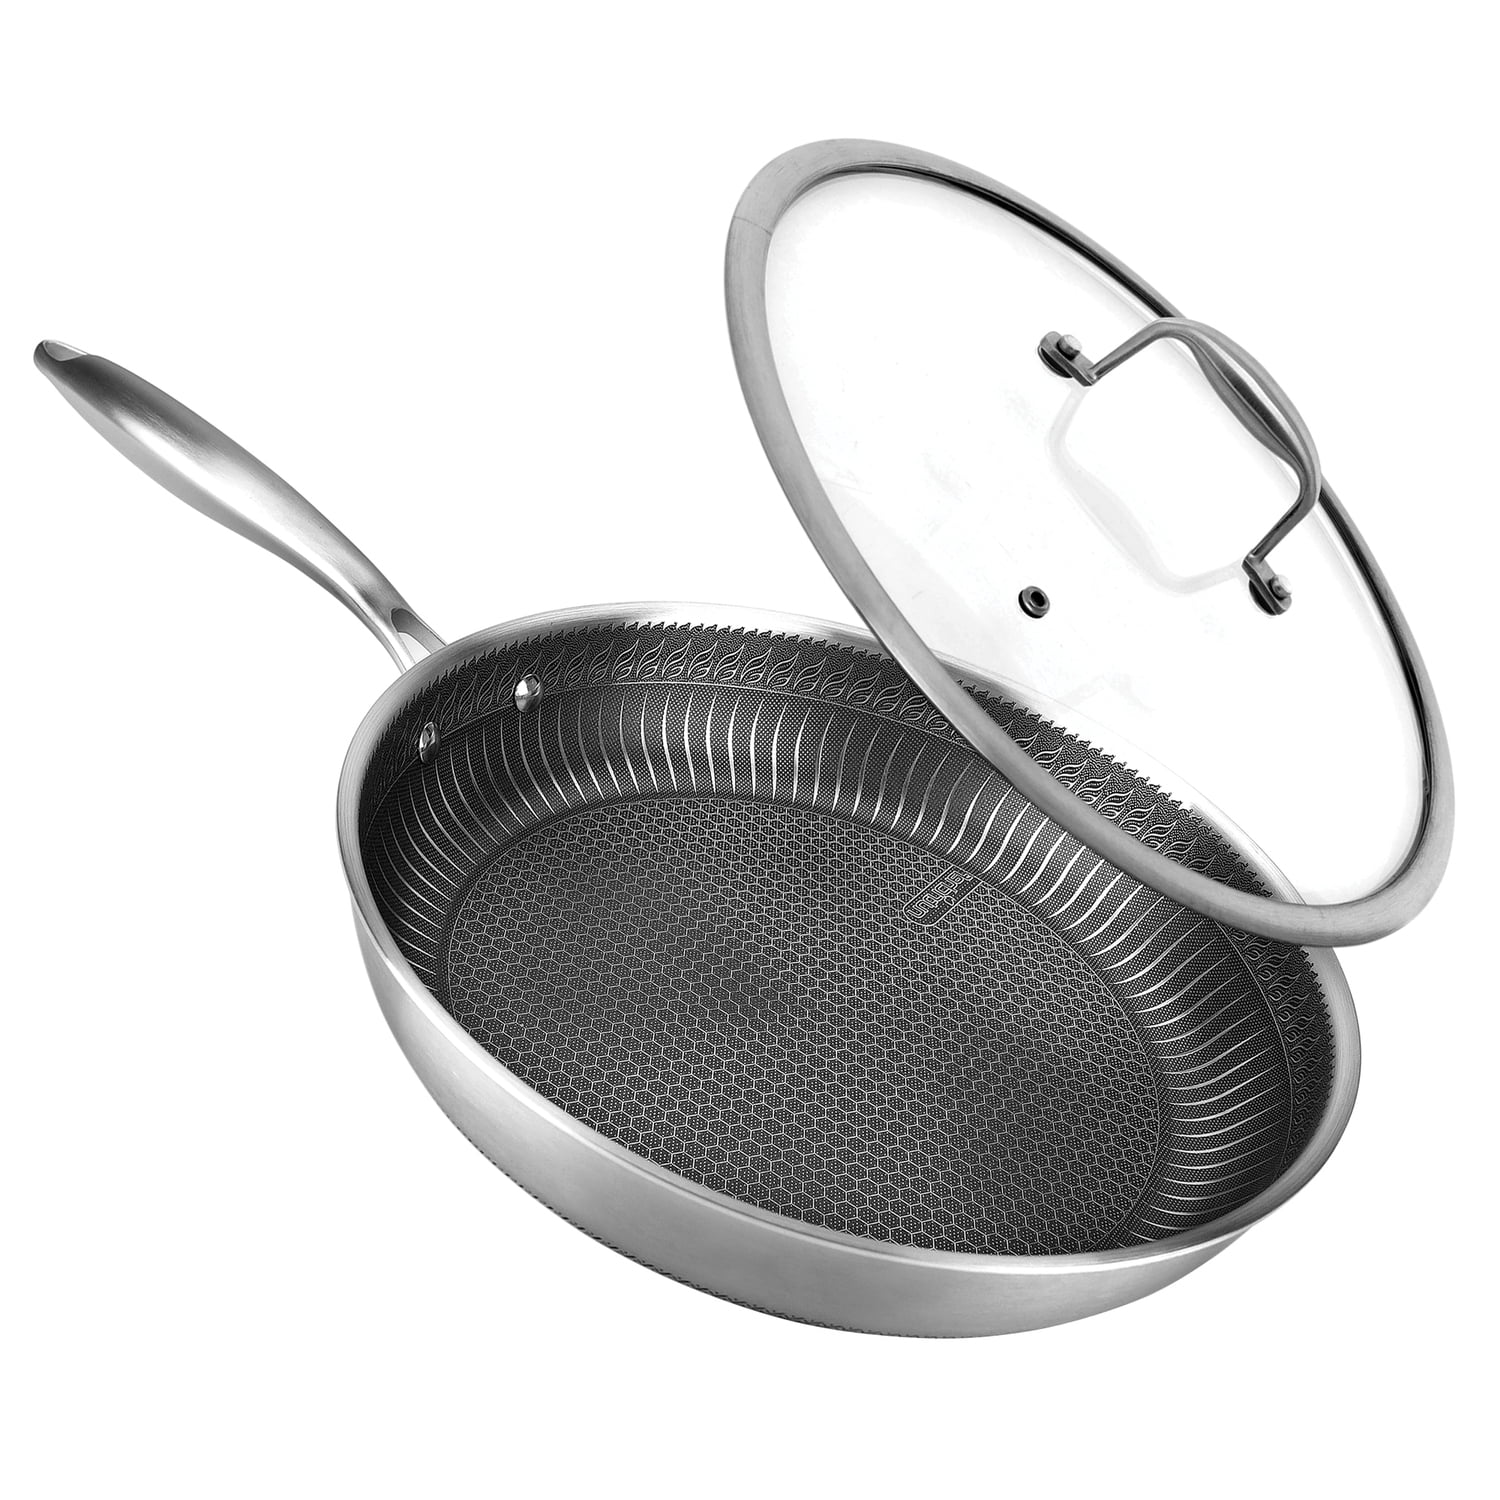 3 in 1 Non-Stick Pan – JOOPZY